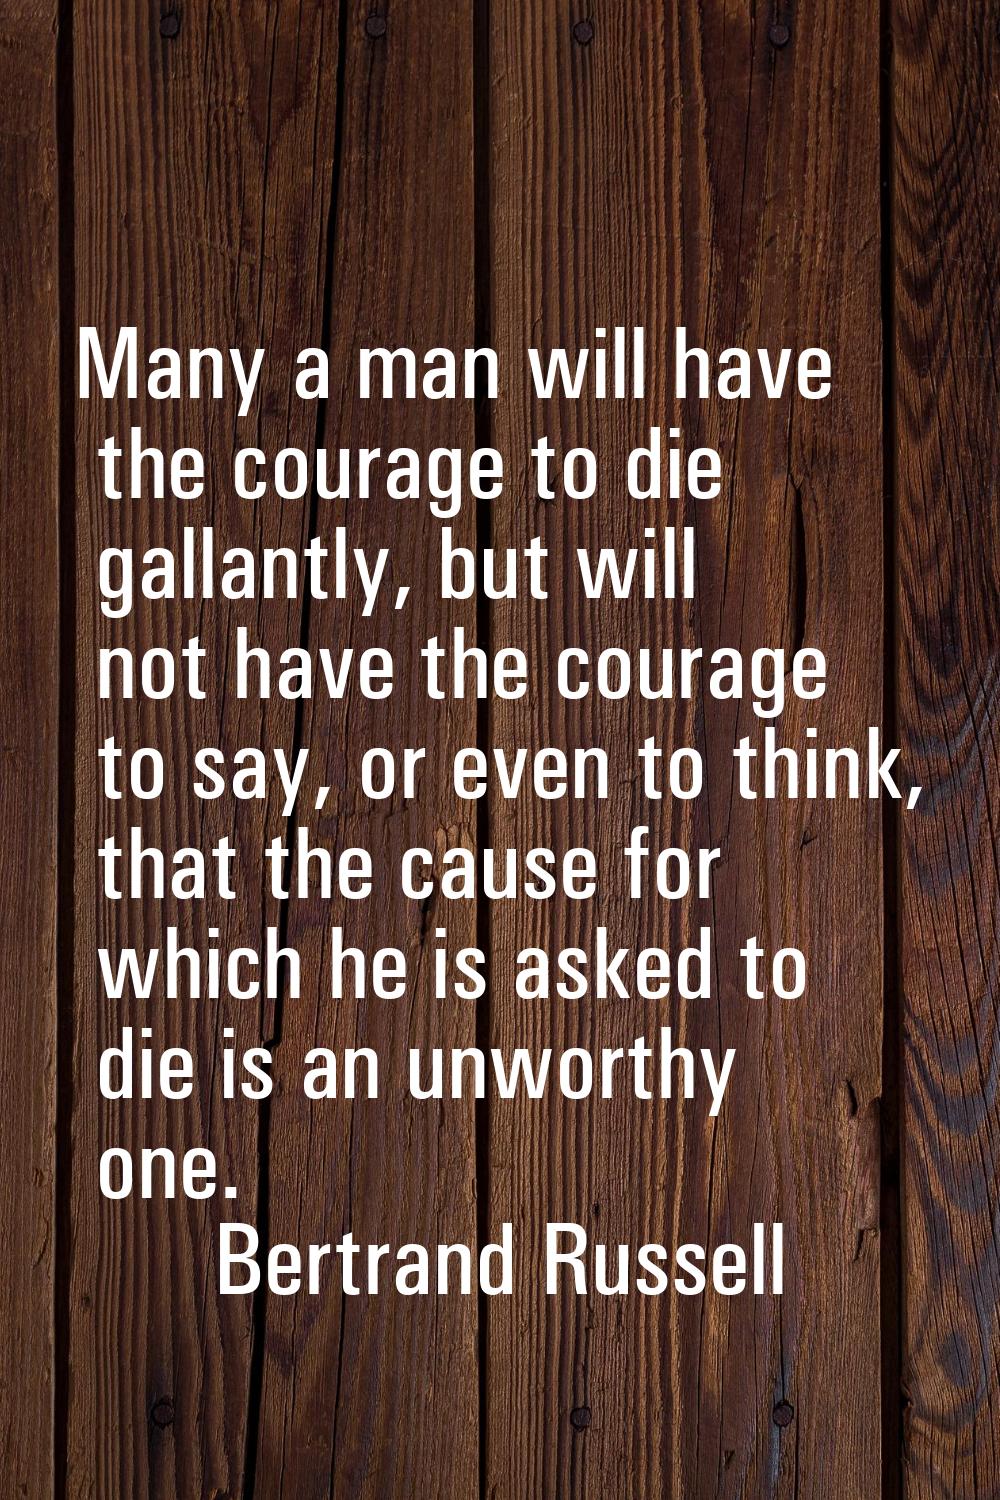 Many a man will have the courage to die gallantly, but will not have the courage to say, or even to